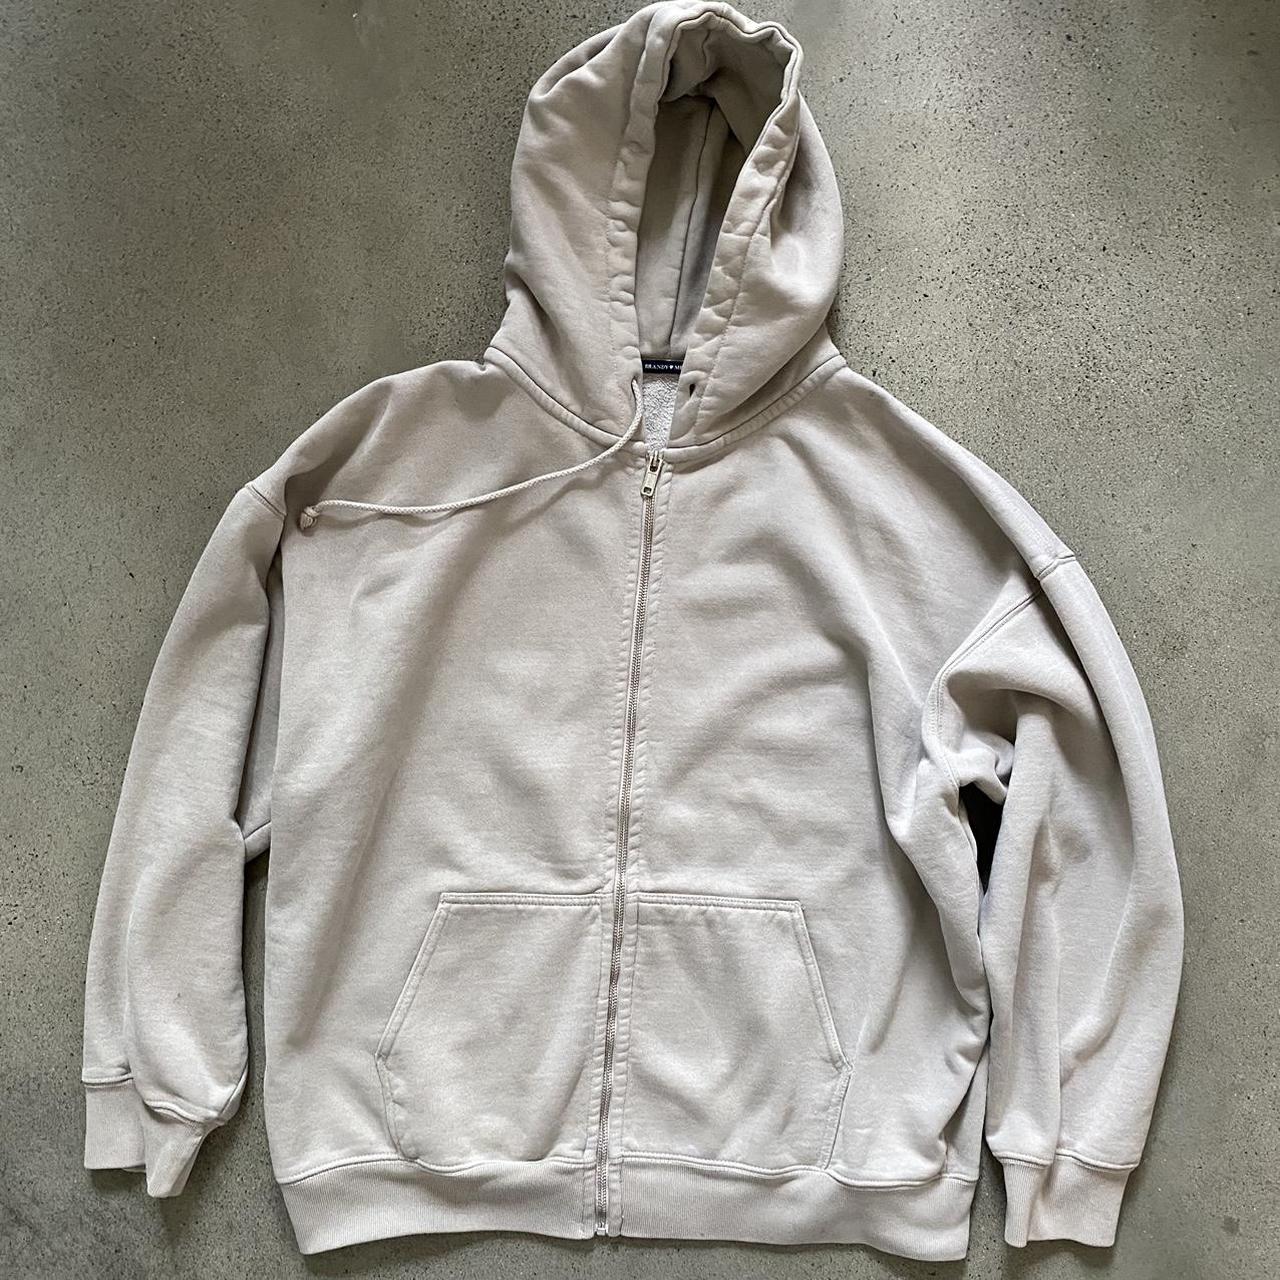 Brandy Melville Christy Hoodie Gray - $23 (48% Off Retail) - From